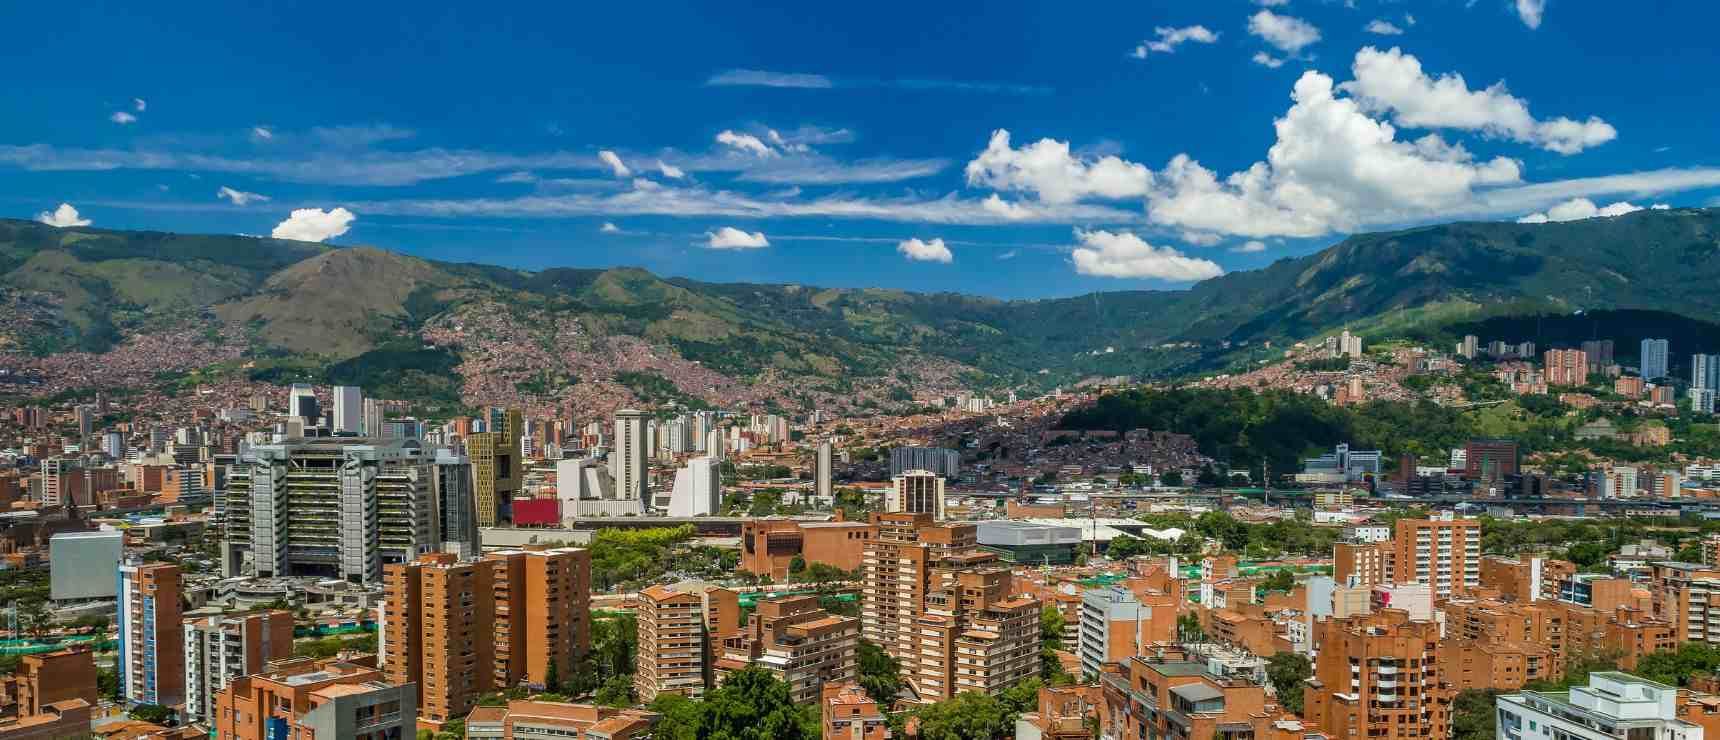 best-private-schools-medellin best-private-schools-medellin Best Private Schools in Medellín